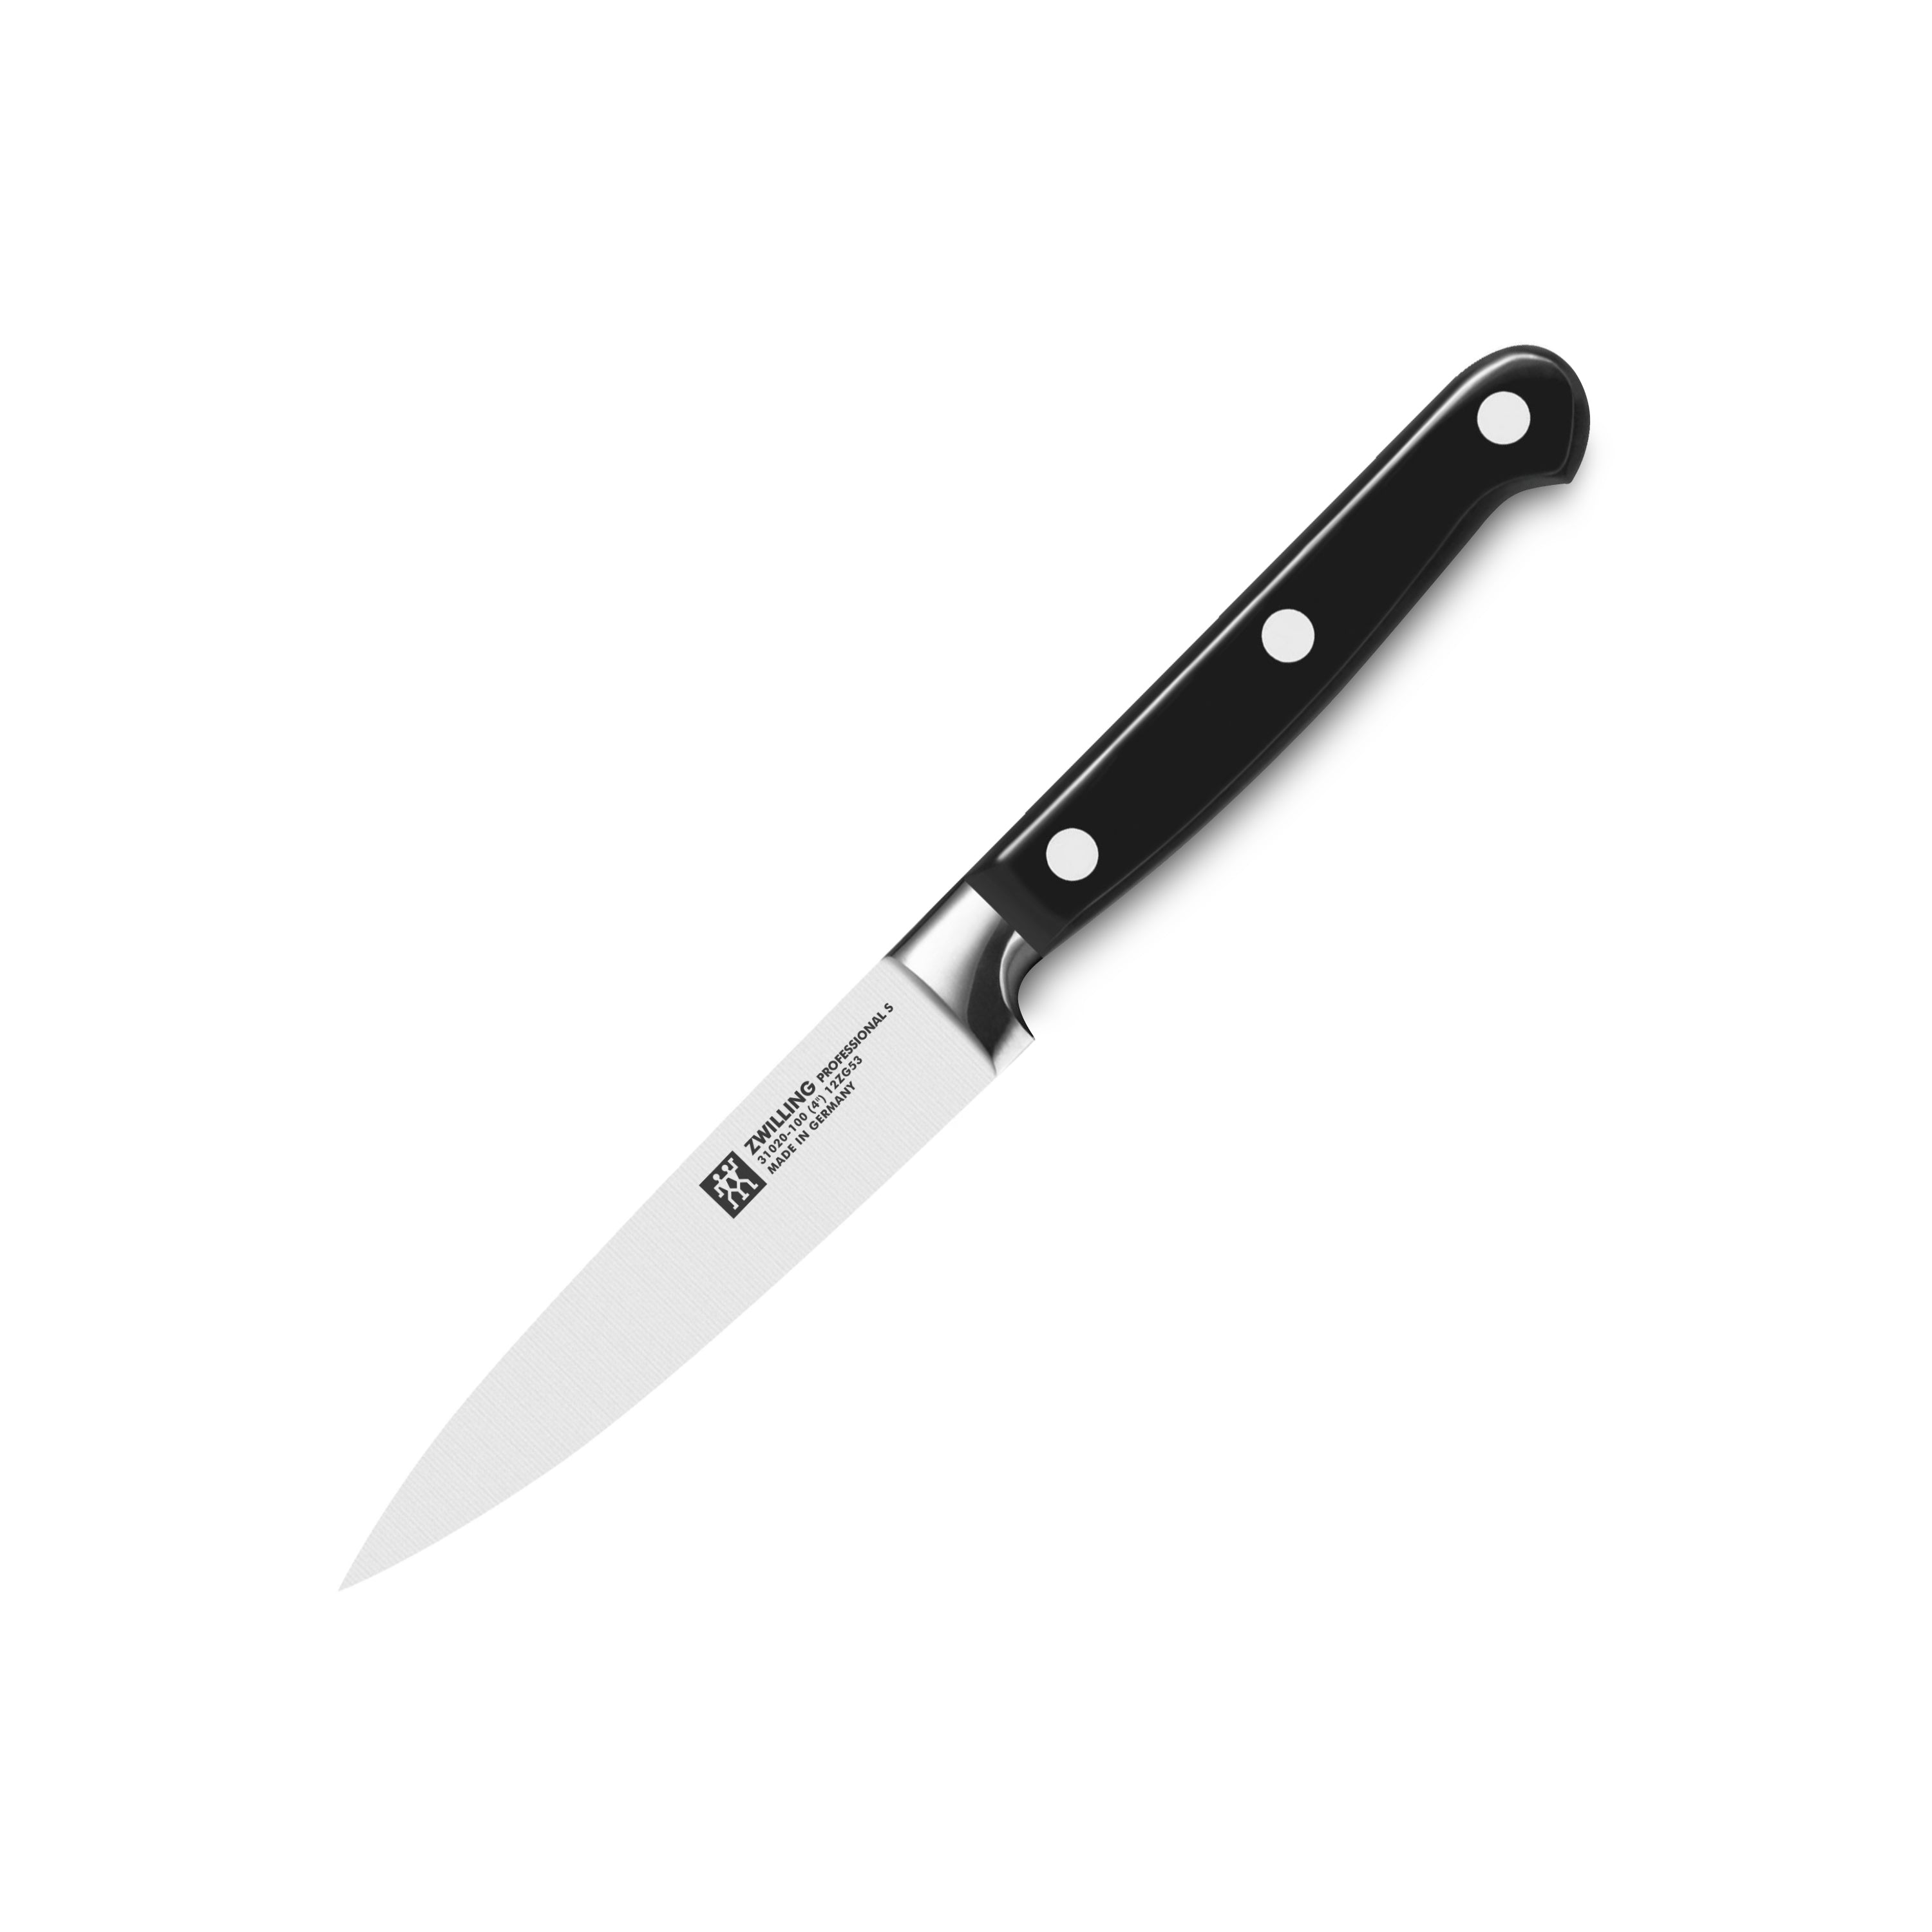 Zwilling J.A. Henckels Four Star 4-Inch Paring Knife